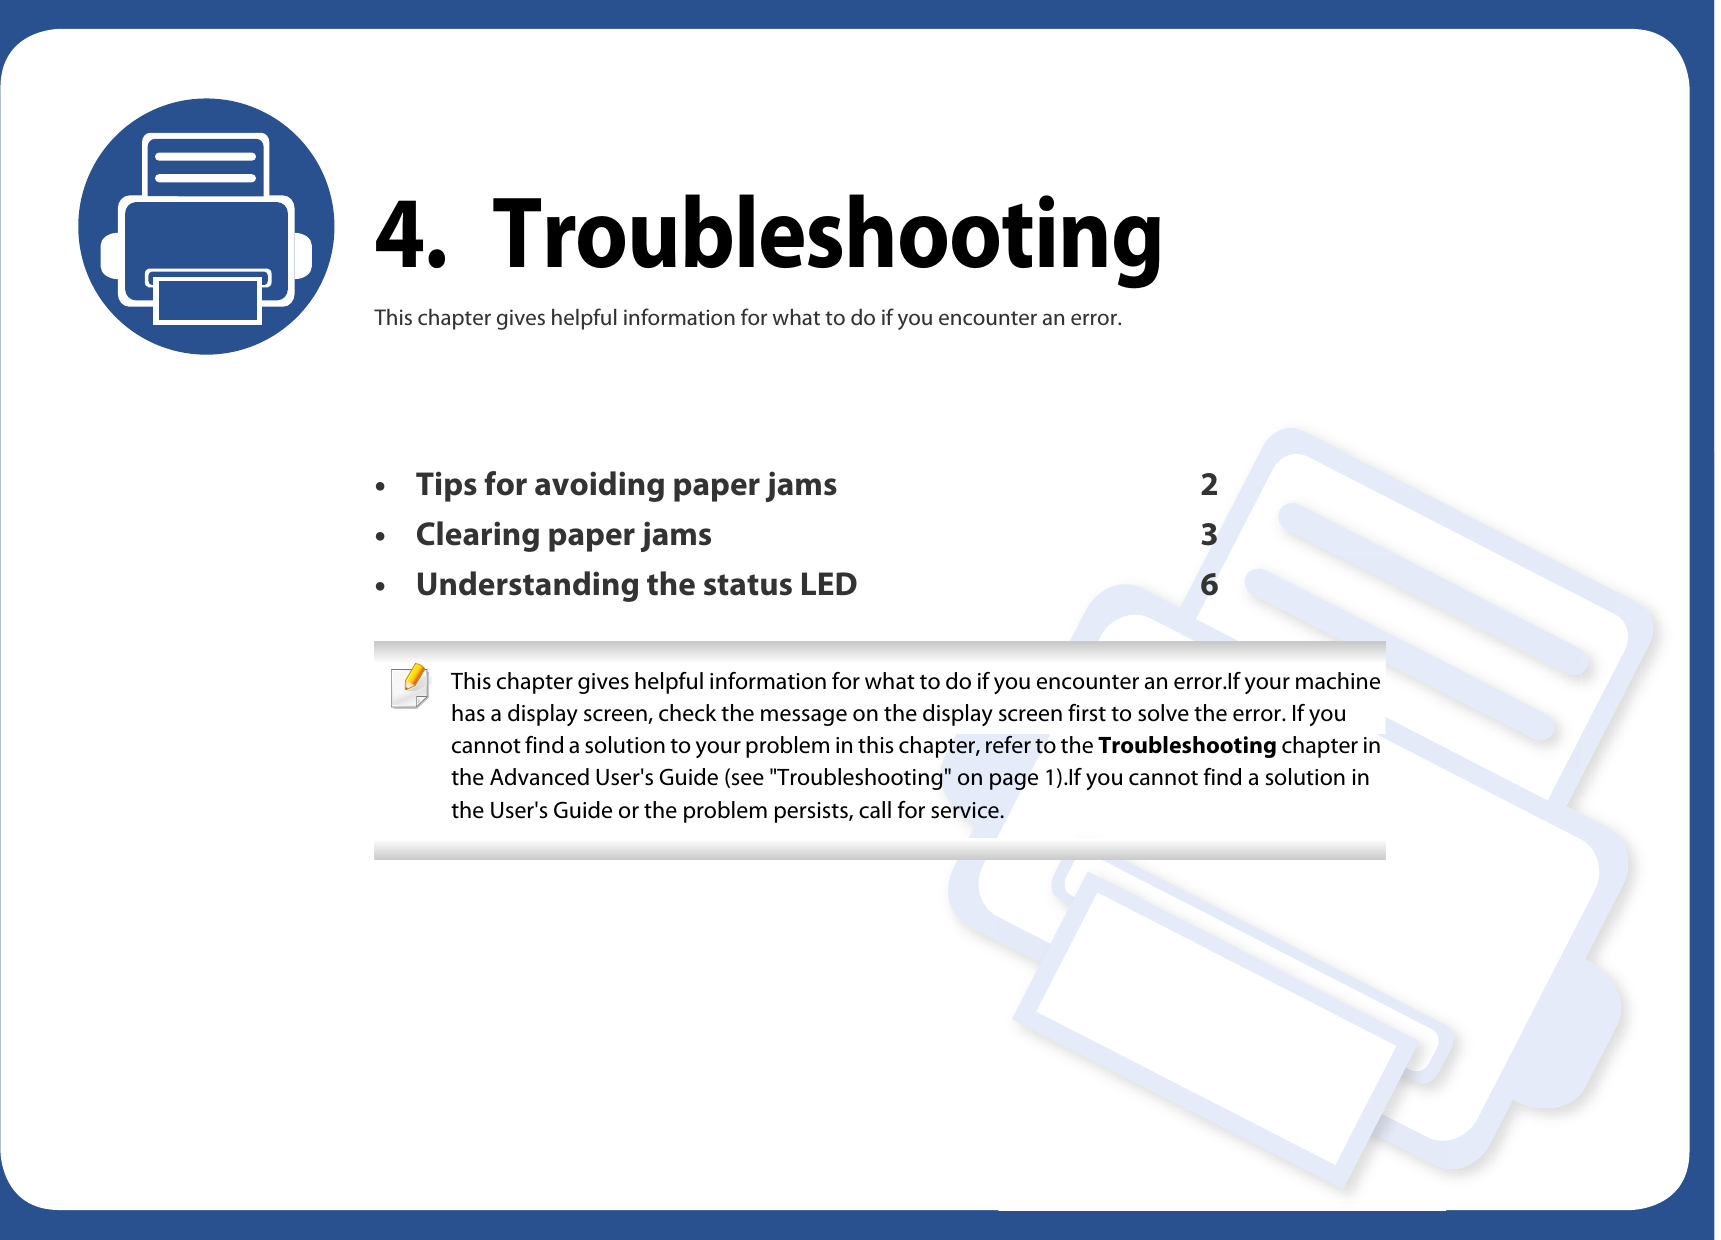 4. TroubleshootingThis chapter gives helpful information for what to do if you encounter an error.• Tips for avoiding paper jams 2• Clearing paper jams 3• Understanding the status LED 6 This chapter gives helpful information for what to do if you encounter an error.If your machine has a display screen, check the message on the display screen first to solve the error. If you cannot find a solution to your problem in this chapter, refer to the Troubleshooting chapter in the Advanced User&apos;s Guide (see &quot;Troubleshooting&quot; on page 1).If you cannot find a solution in the User&apos;s Guide or the problem persists, call for service.  